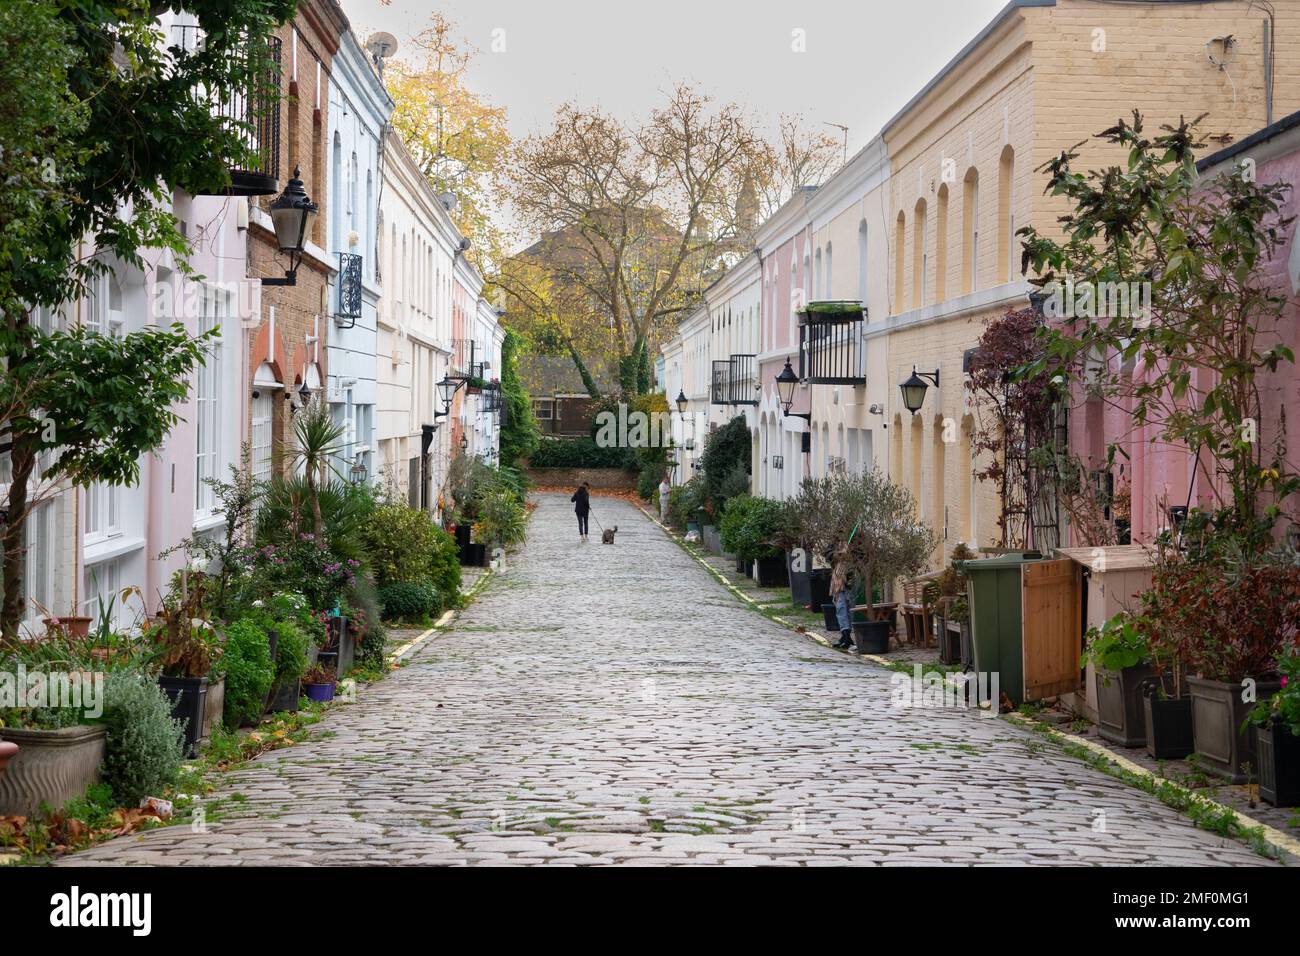 Pretty narrow Mews with cobbled street Ennismore gardens Mews Westminister London England Stock Photo